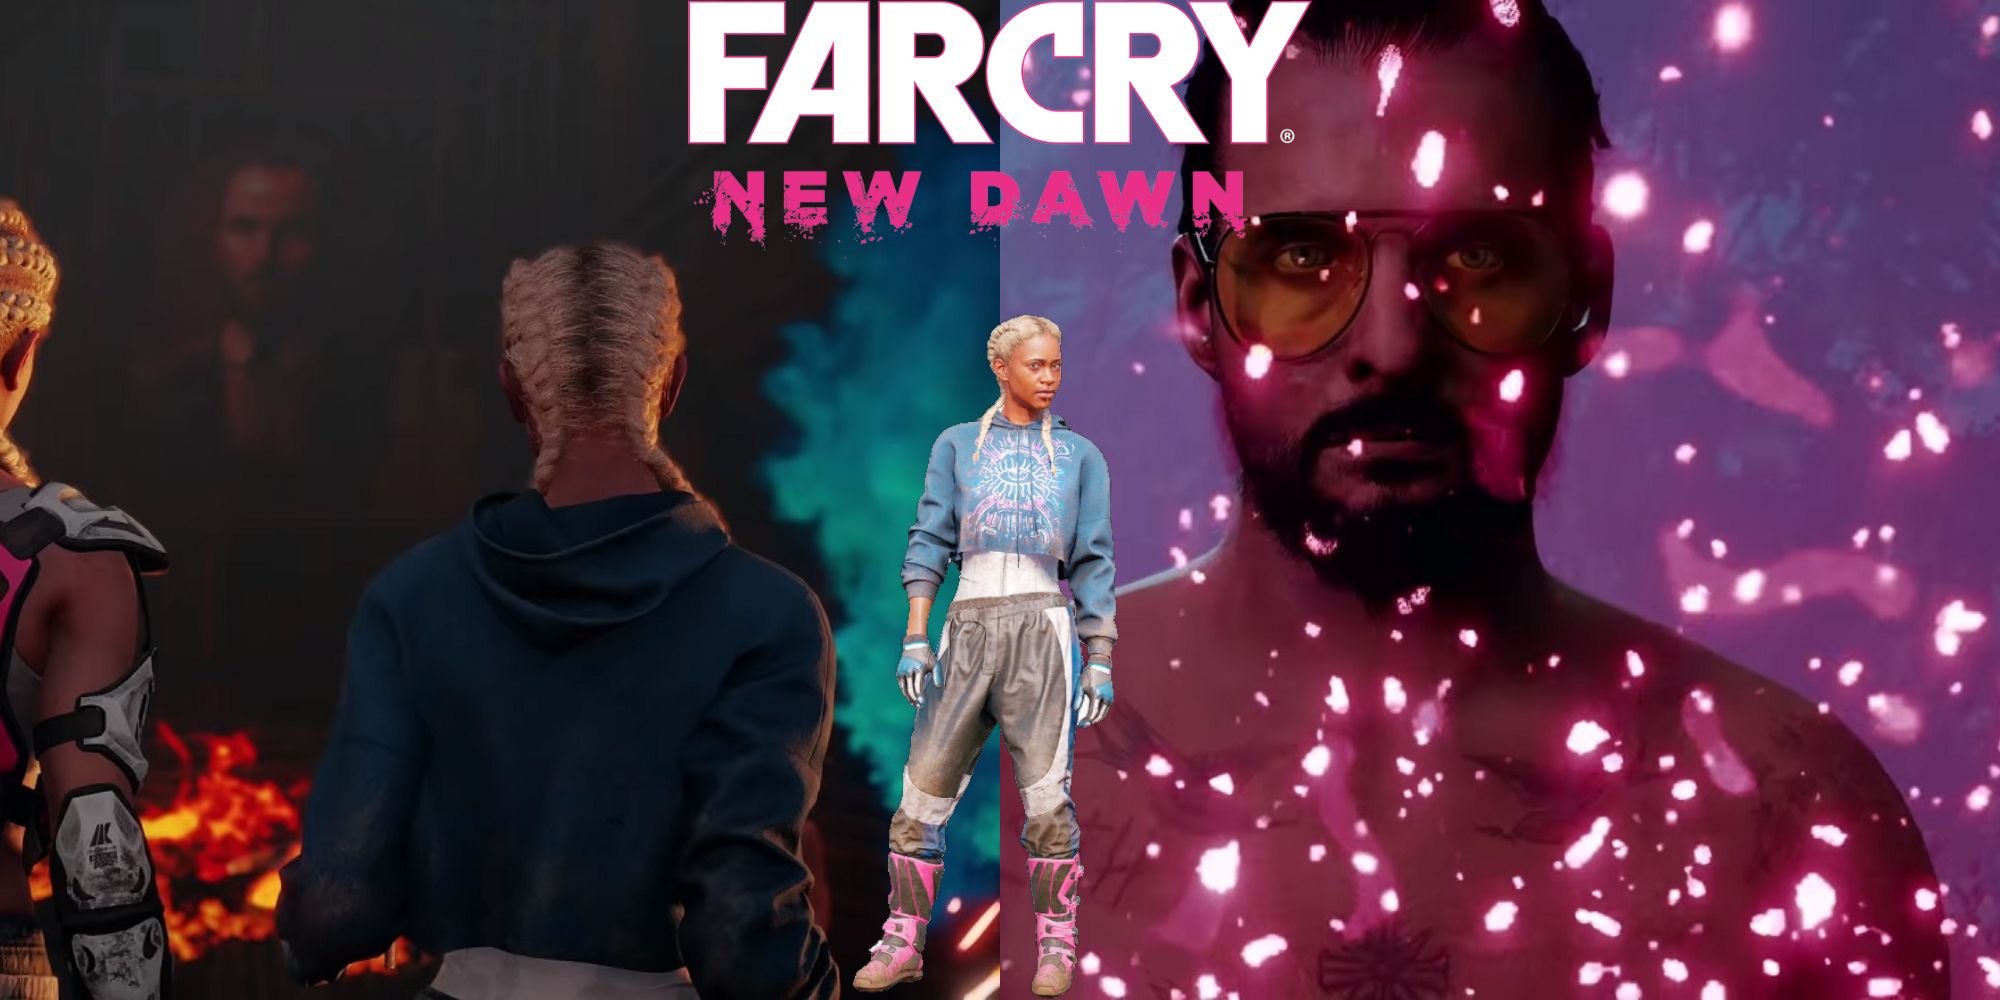 Far Cry characters and logo